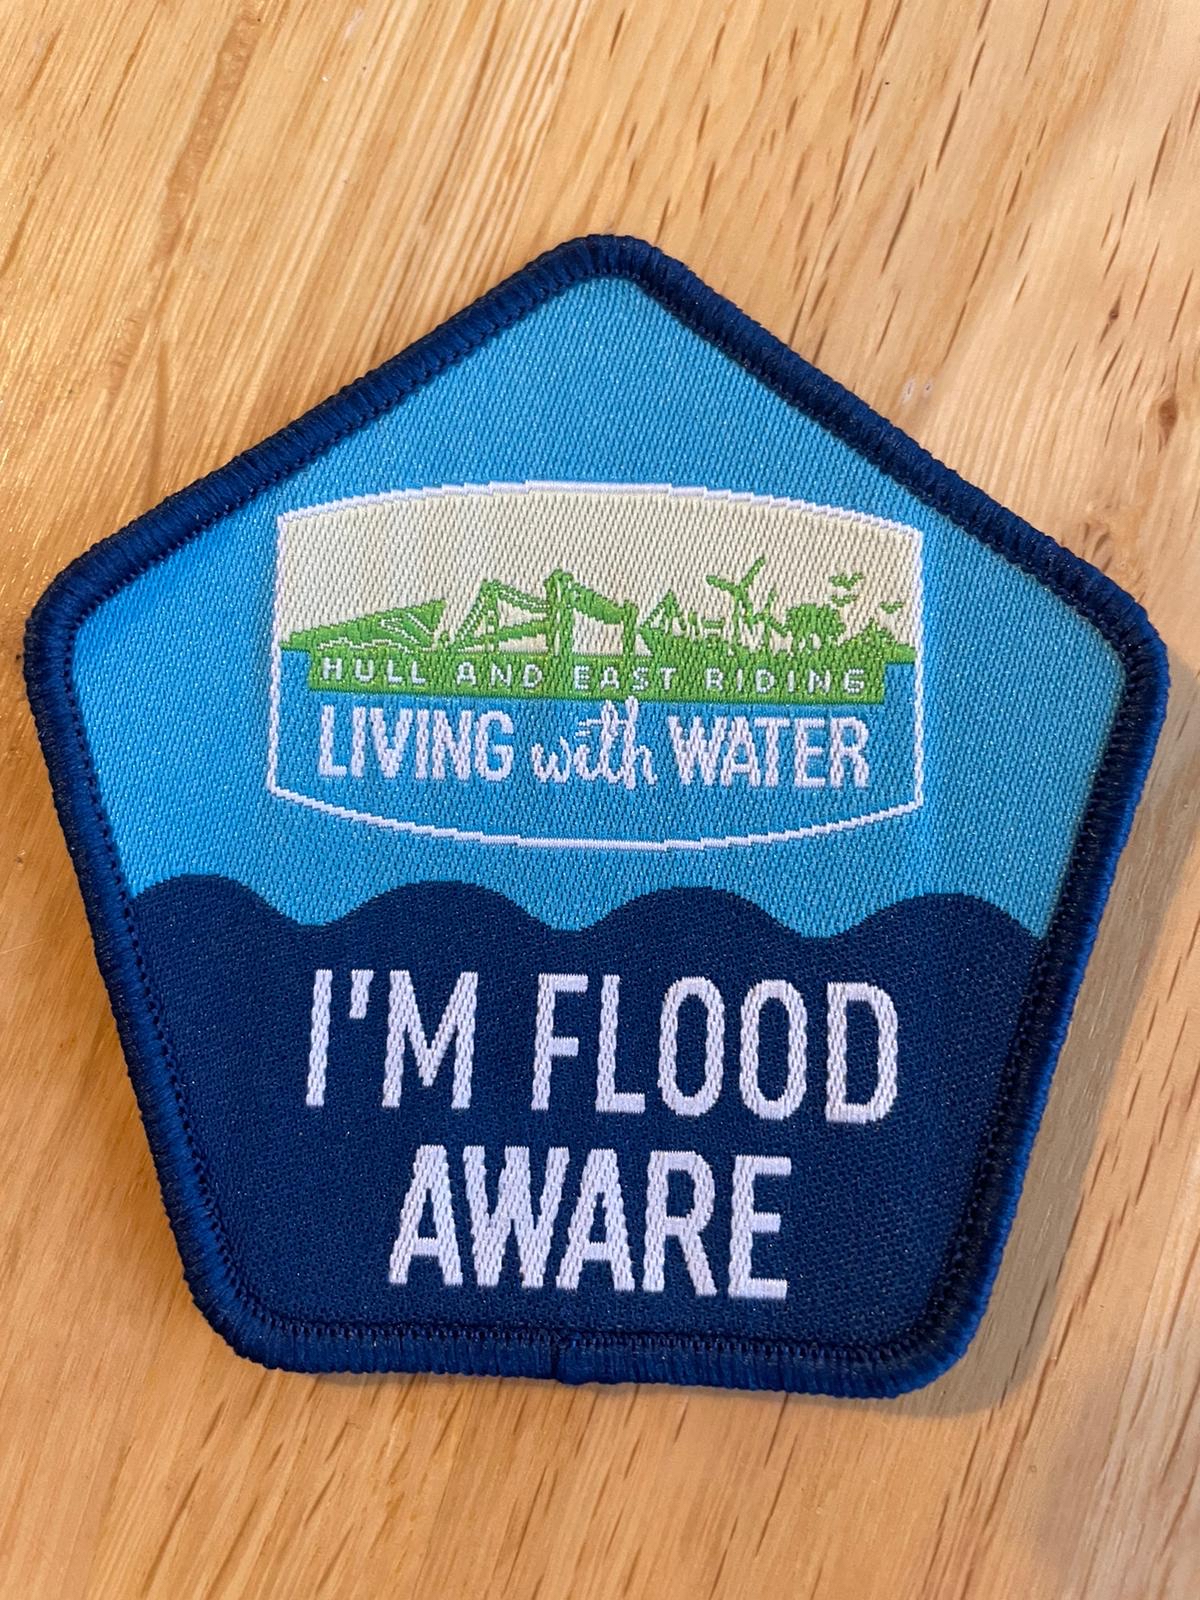 The new Living With Water badge